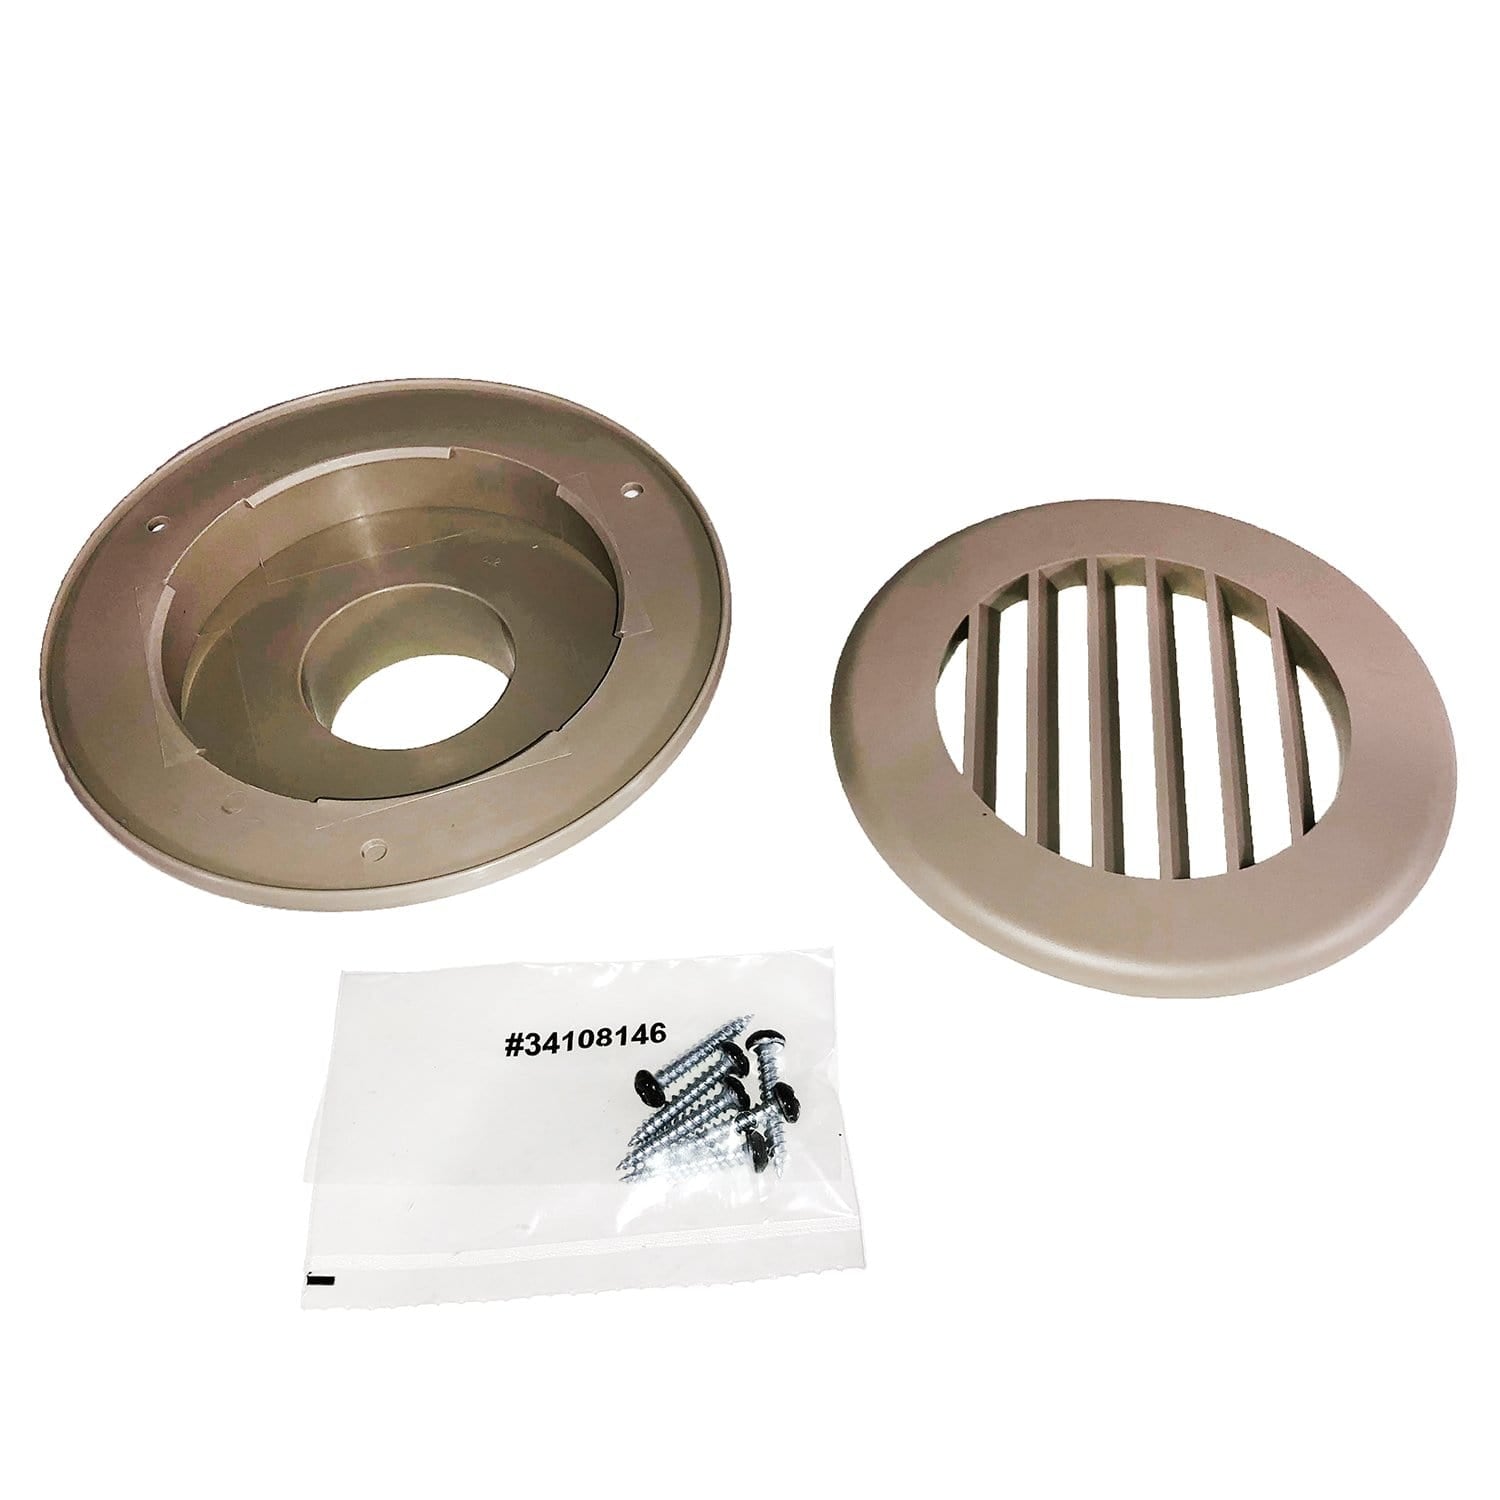 Thetford 94263 (601-015-94263) 2" Thermovent Ducted Heat Vent, No Damper, Tan